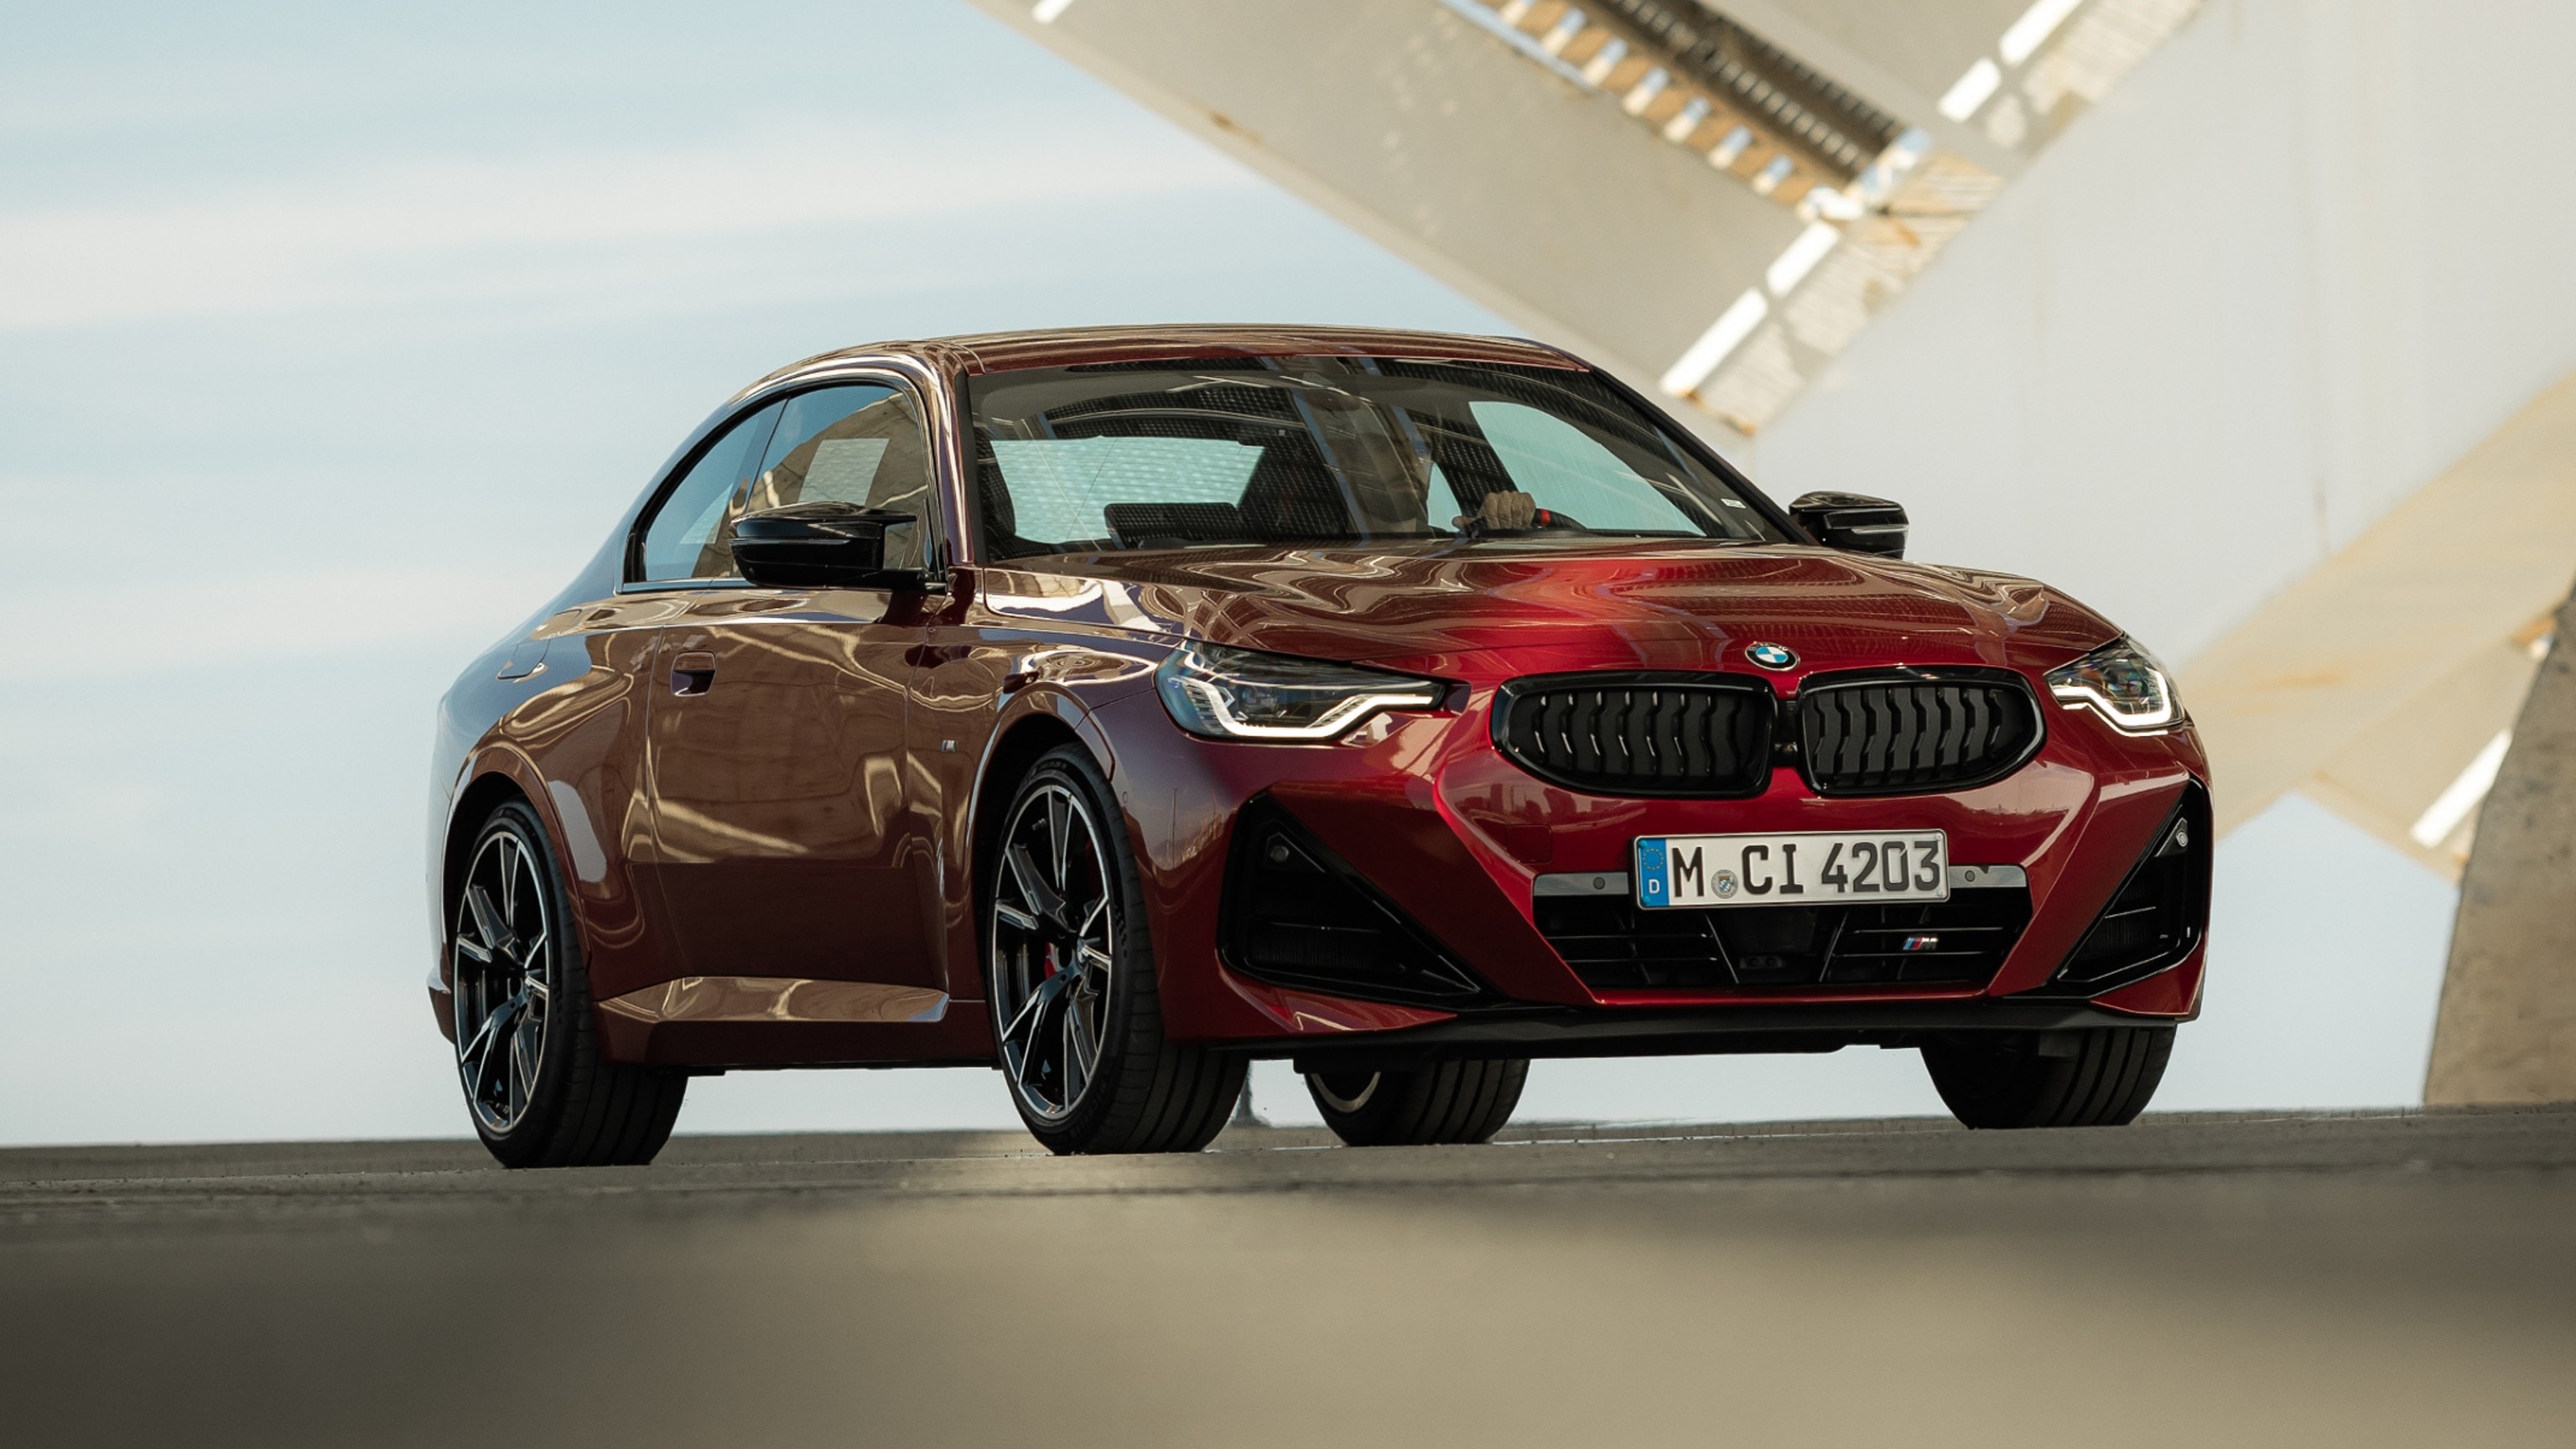 The BMW 2 Series Coupe gets subtle changes with revised bumpers and new alloy wheels